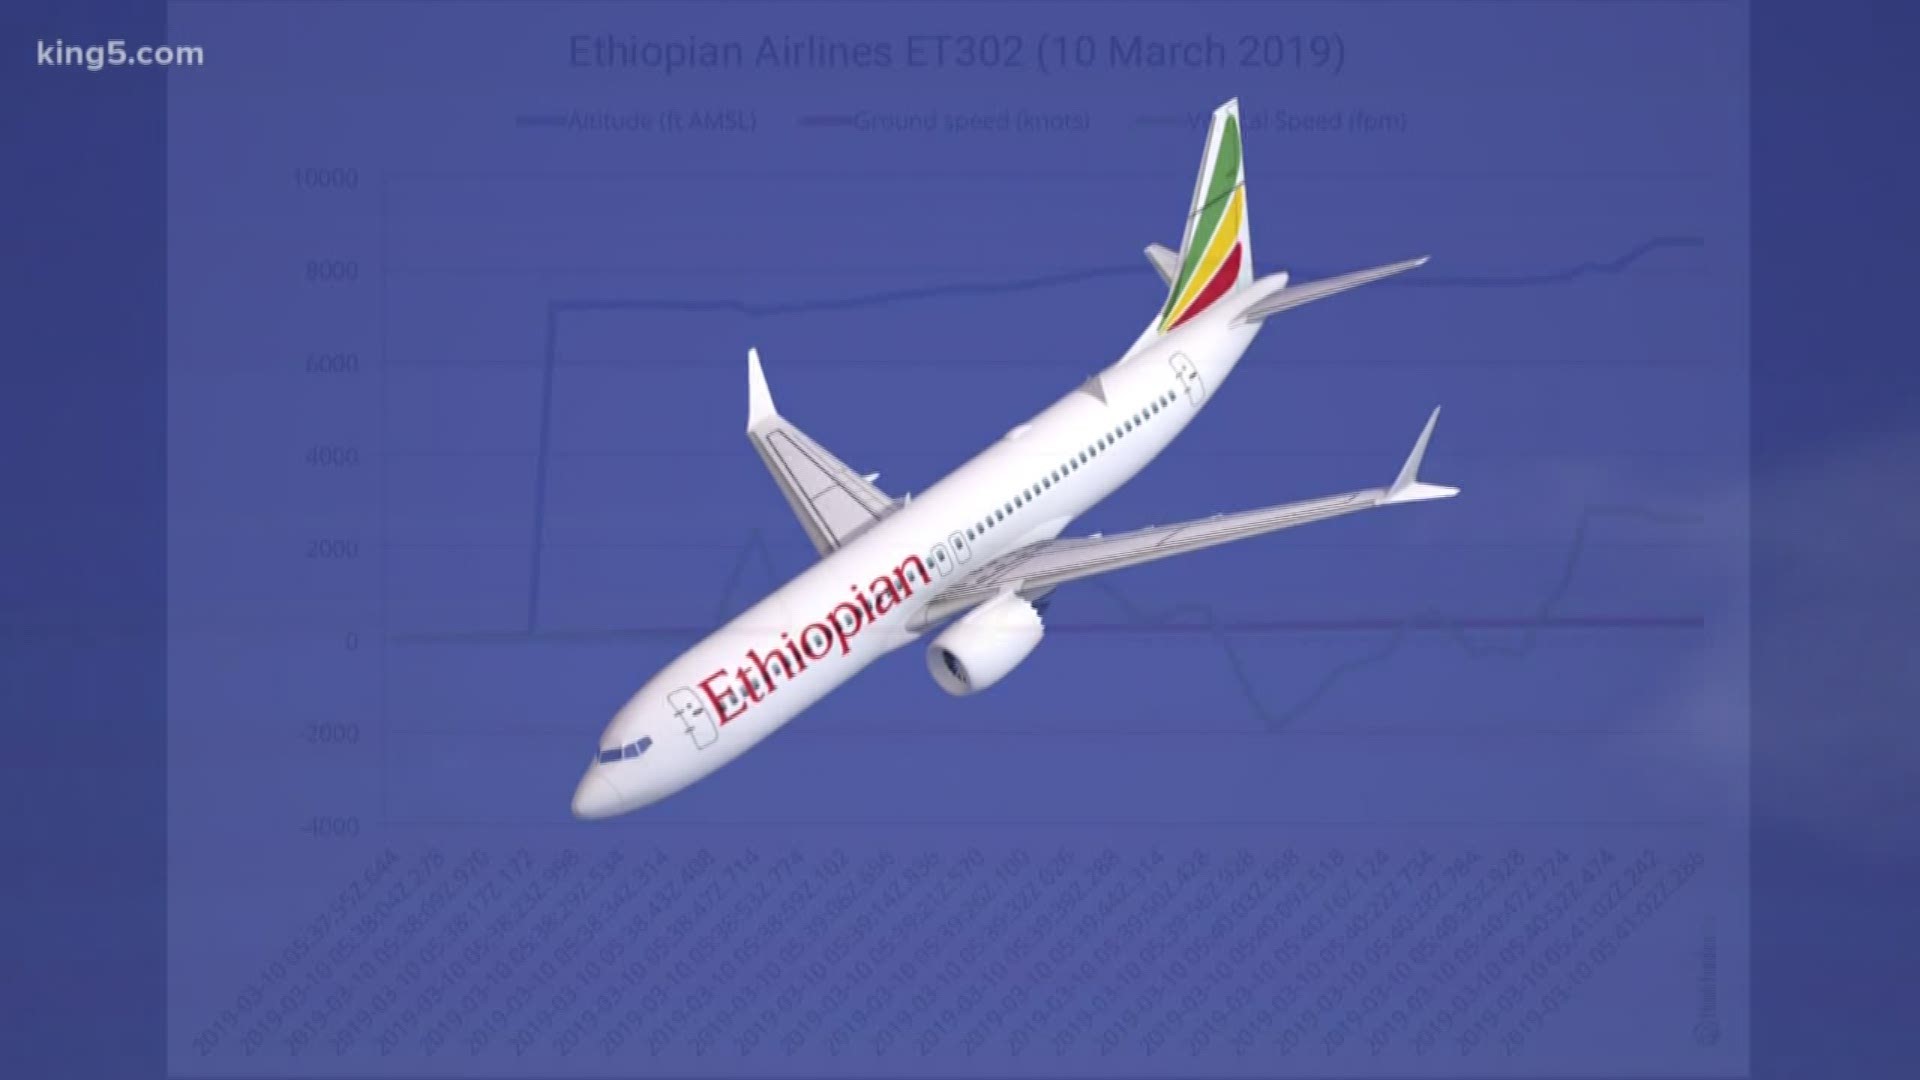 We have learned about a major clue discovered in the wreckage of the crashed Ethiopian Airlines 737 Max 8. A pieces of wreckage confirms flight data transmitted to a satellite before the jet crashed near Addis Ababa on Sunday. And back in Western Washington, Boeing says it will continue to build new 737 Max airplanes, even as the plane is grounded worldwide. KING 5 Aviation Specialist Glenn Farley reports on this developing story.